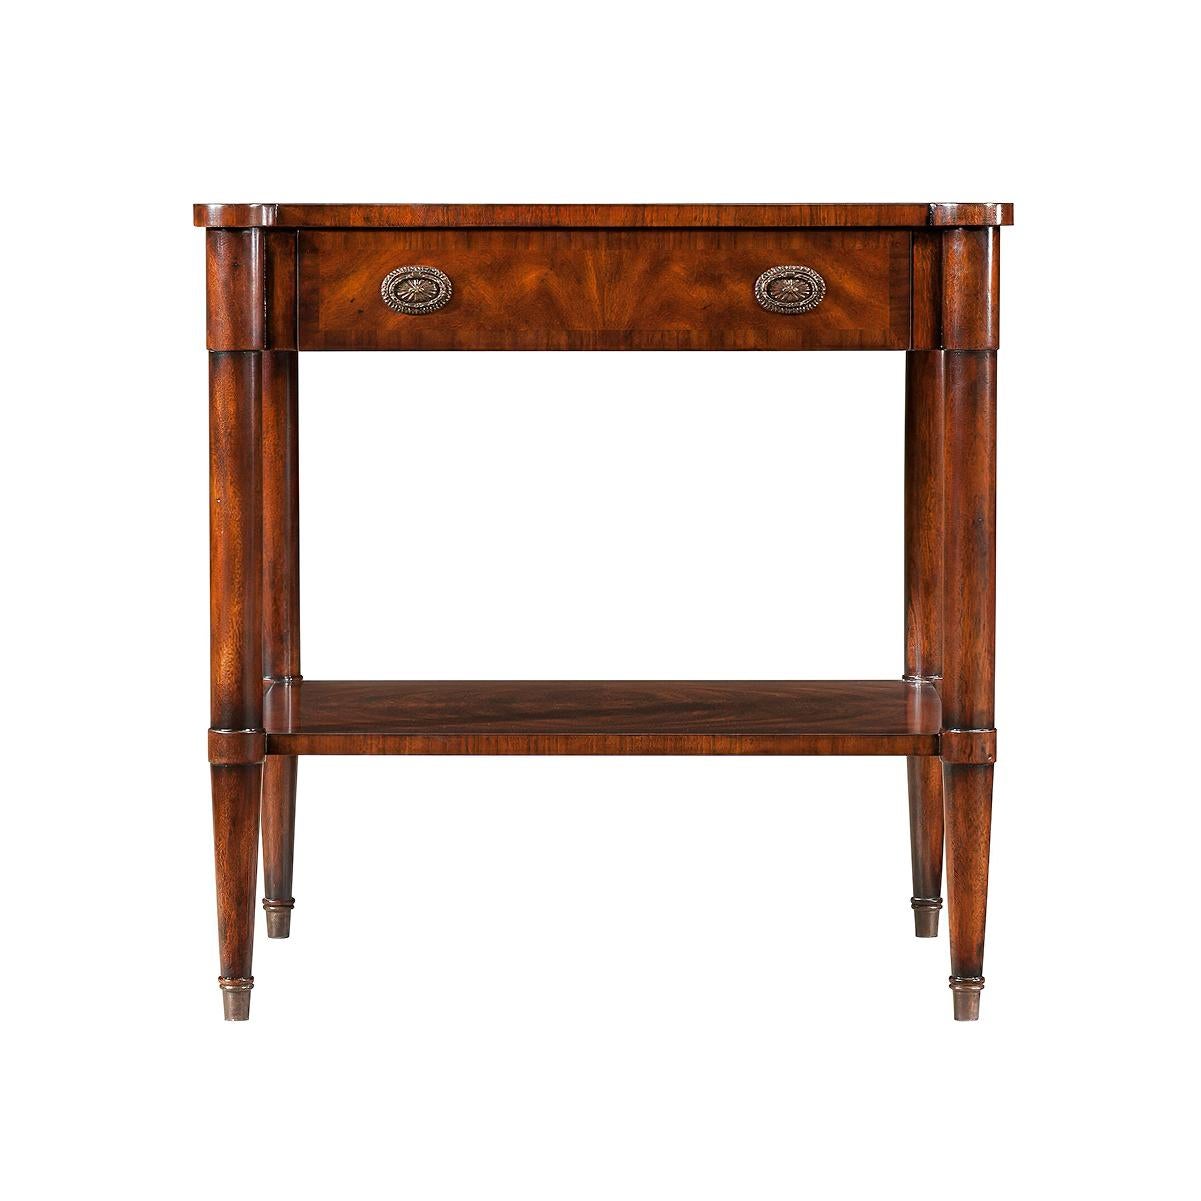 A neoclassic style French bedside table, the rectangular top with rounded protruding corners and one frieze drawer, on turned legs joined by an under tier.

Dimensions: 28